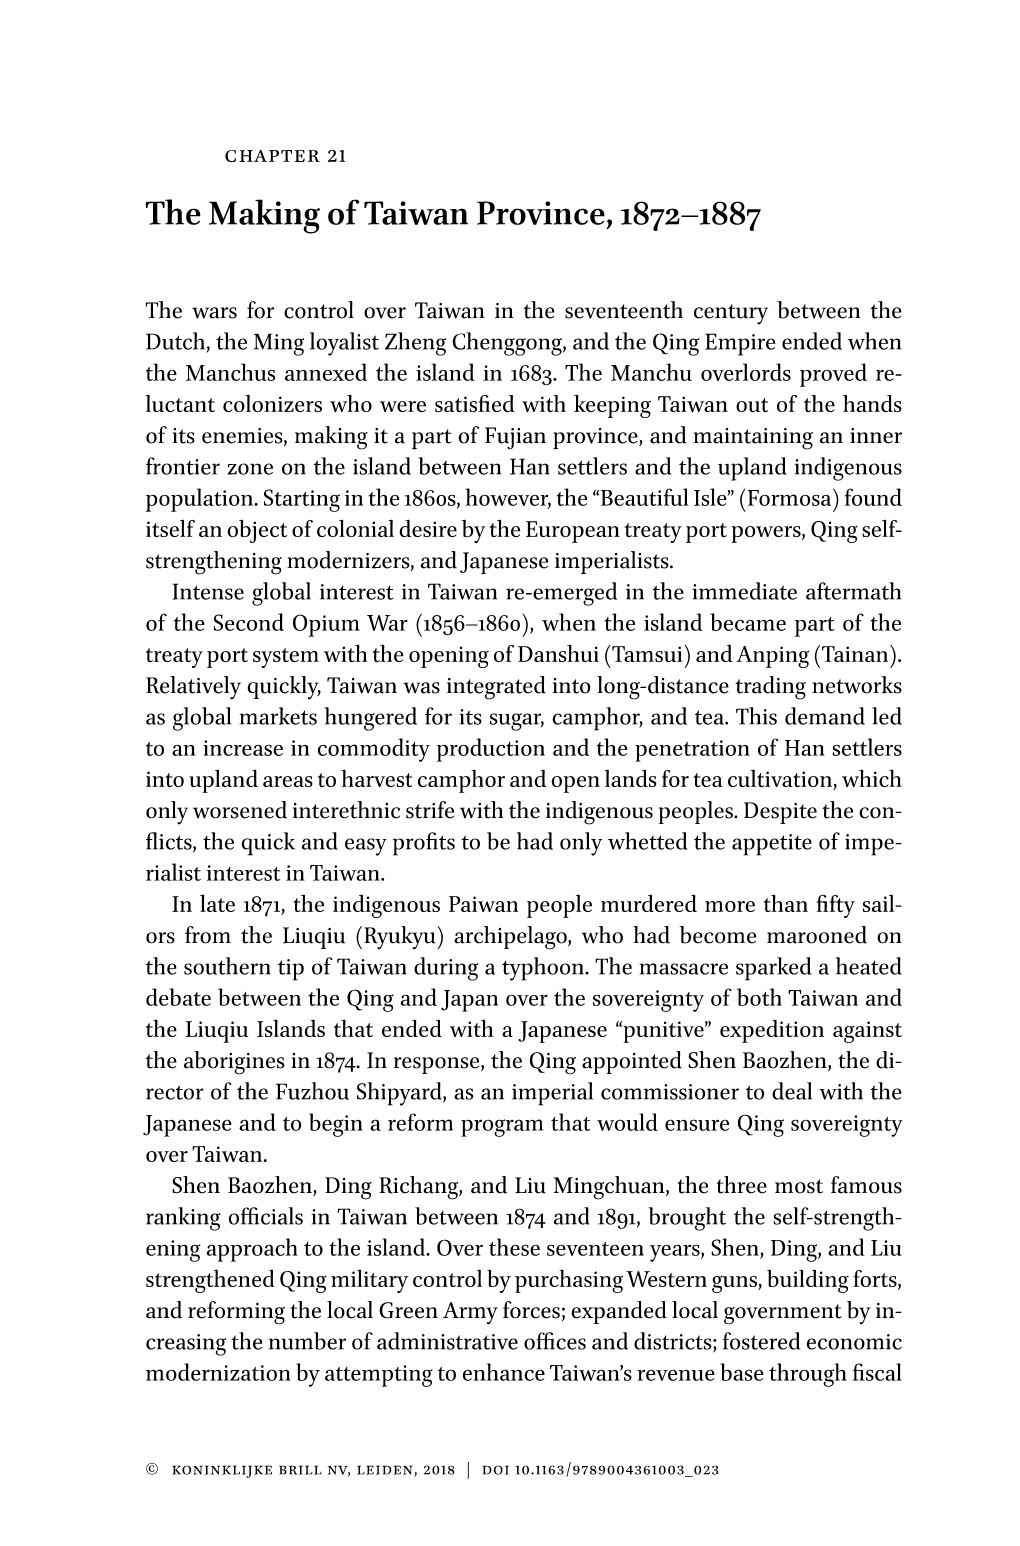 The Making of Taiwan Province, 1872–1887